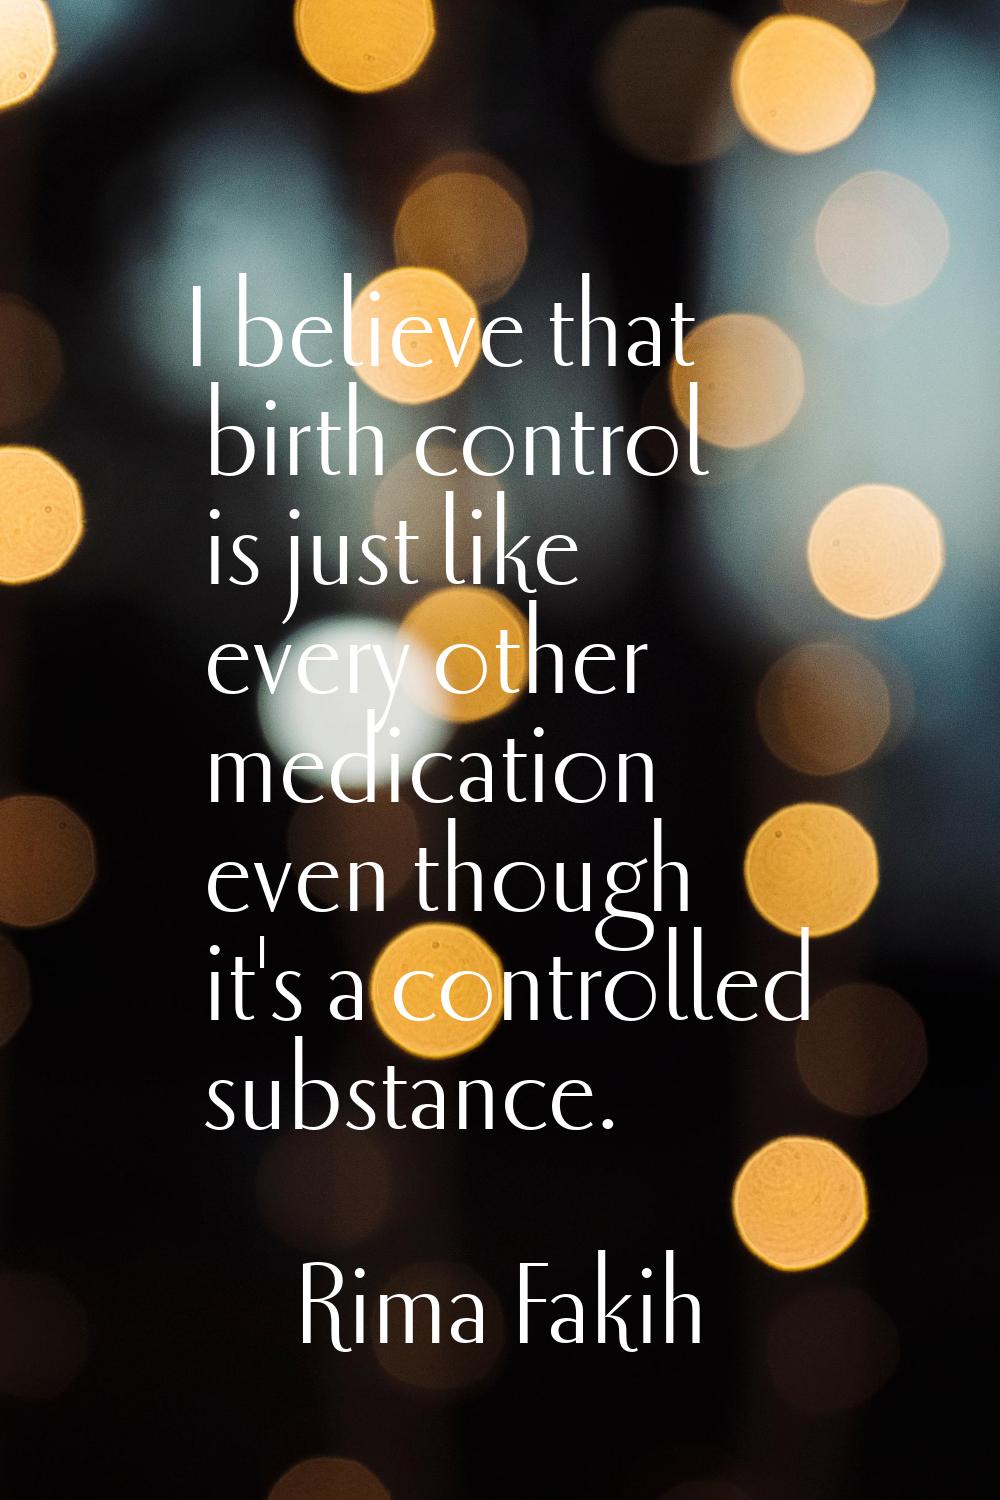 I believe that birth control is just like every other medication even though it's a controlled subs